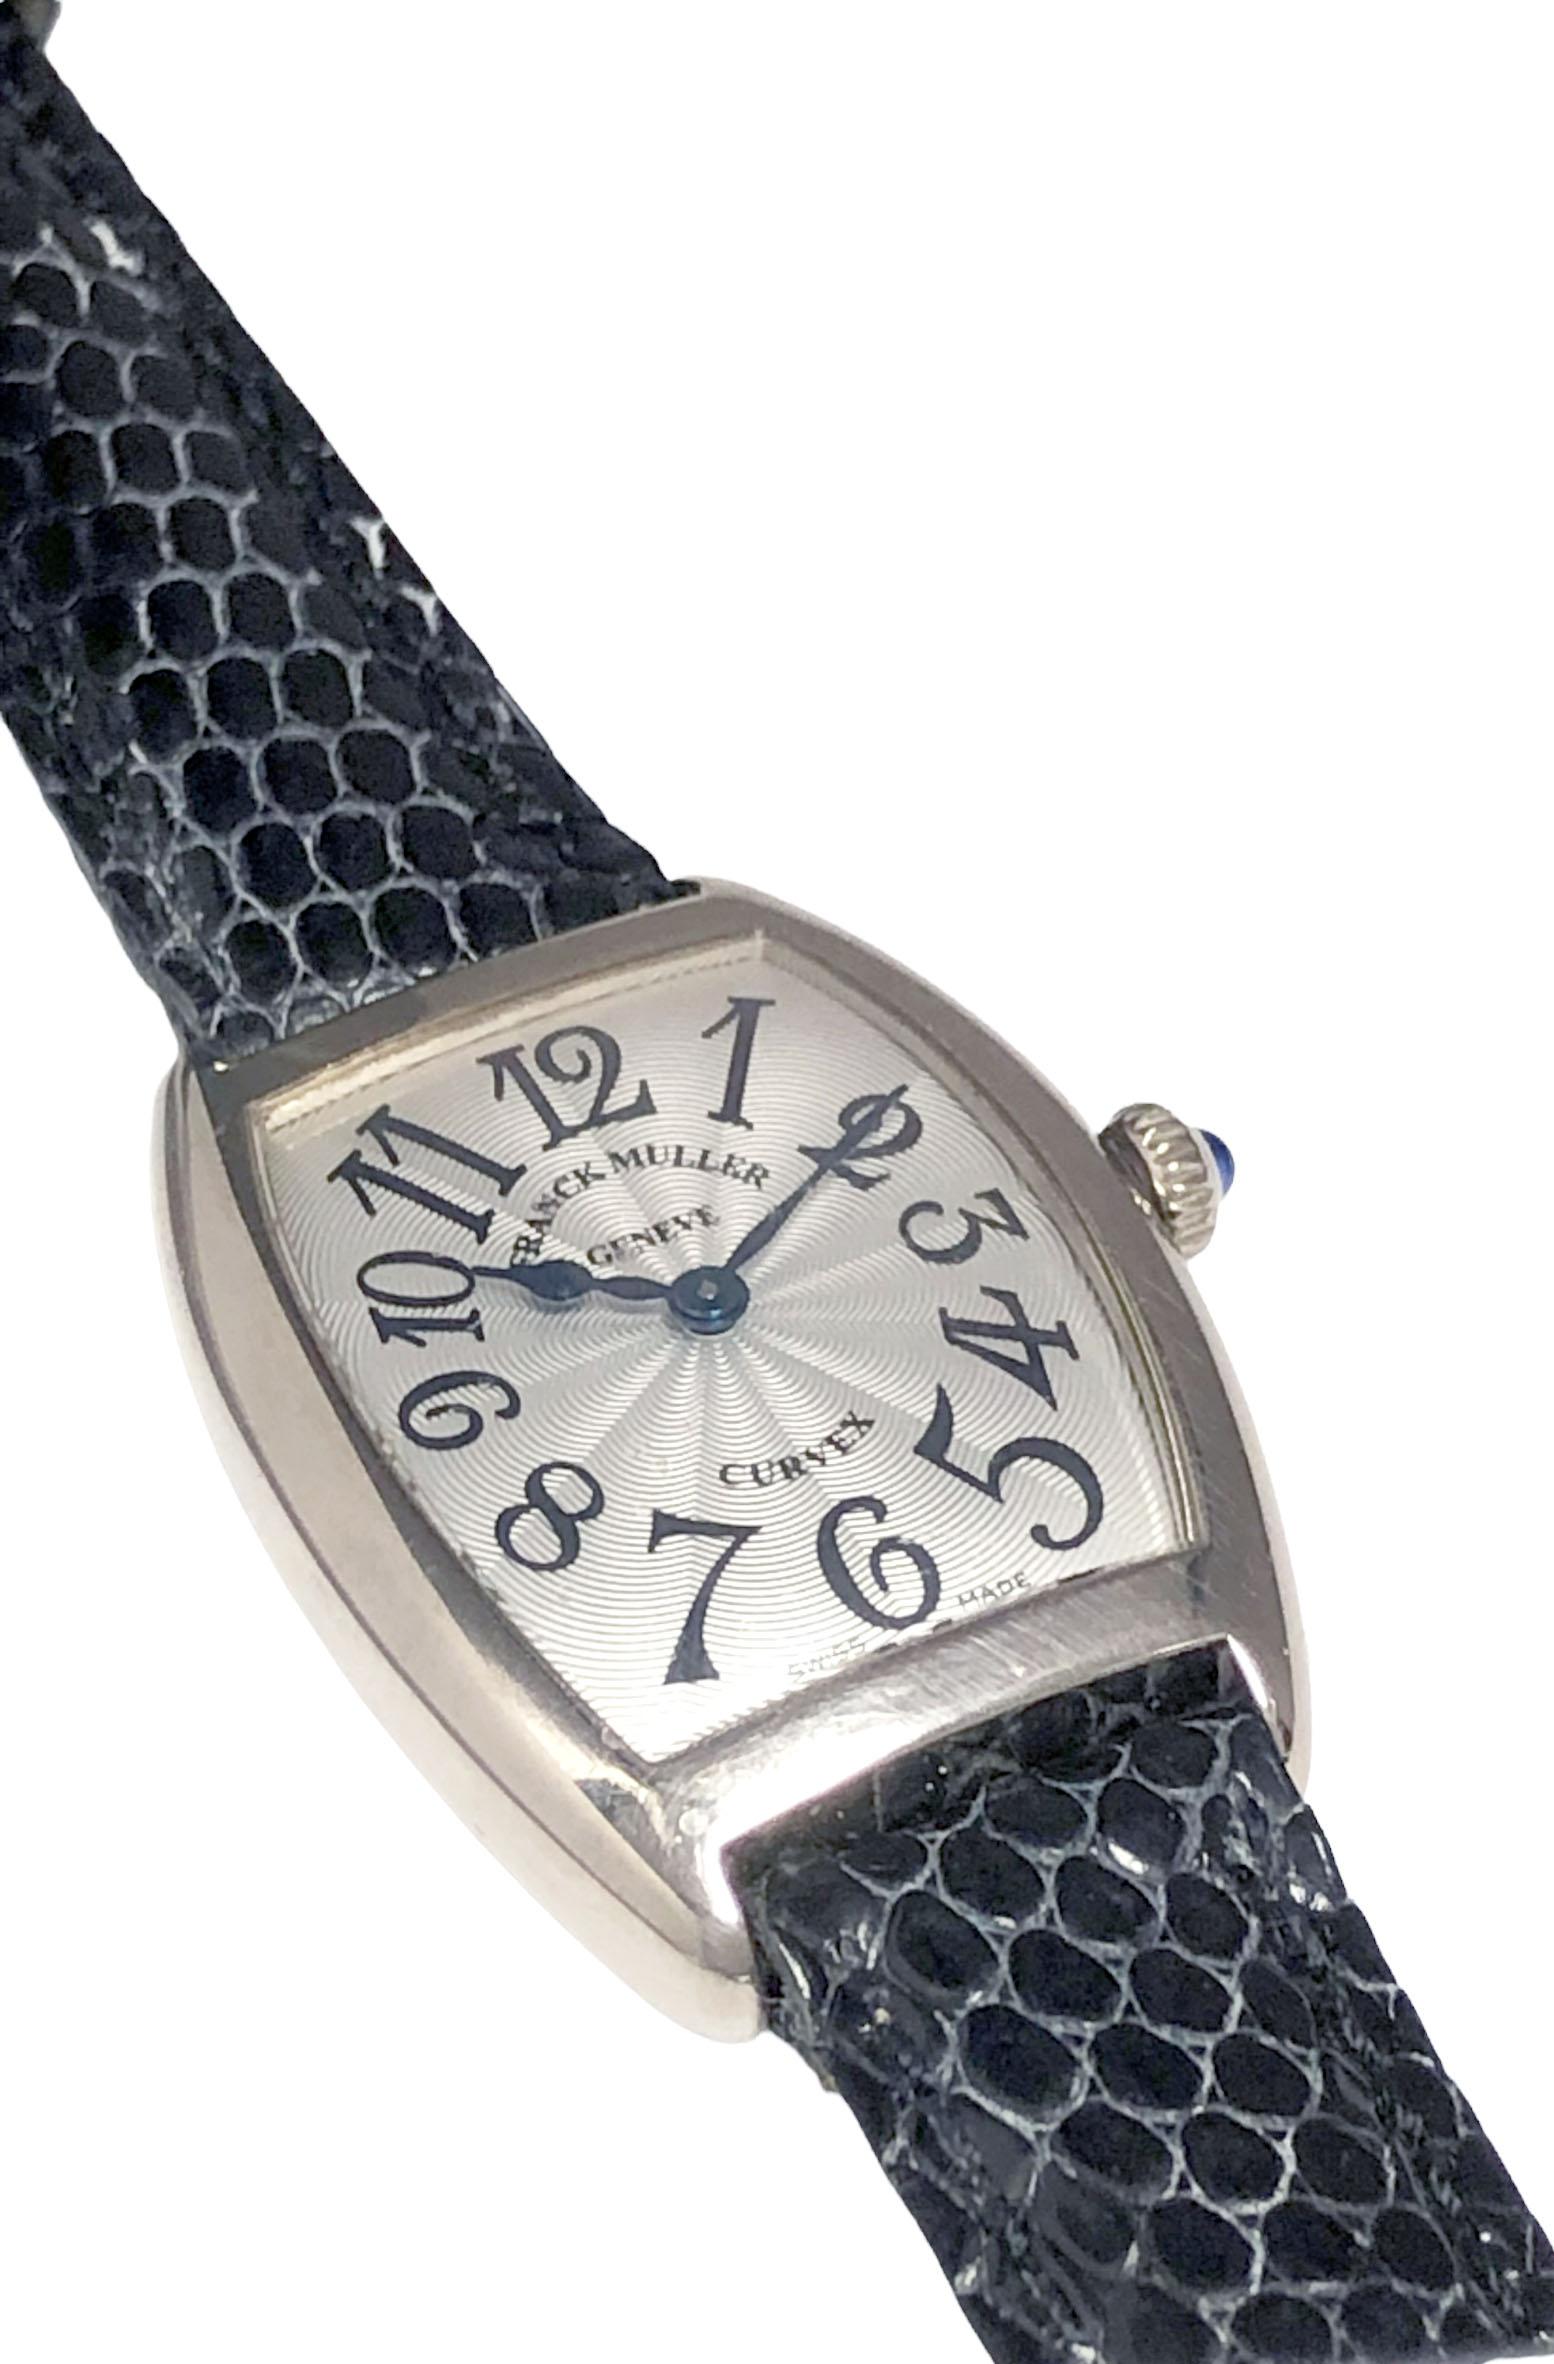 Circa 2000 Franck Muller Reference 1752 Ladies Curvex Wrist Watch, 33 X 25 M.M. 18k White Gold case, Quartz movement, Silver engine turned Guilloche dial with Black Arabic markers, Sapphire set Crown. New Black Lizard strap with original White Gold